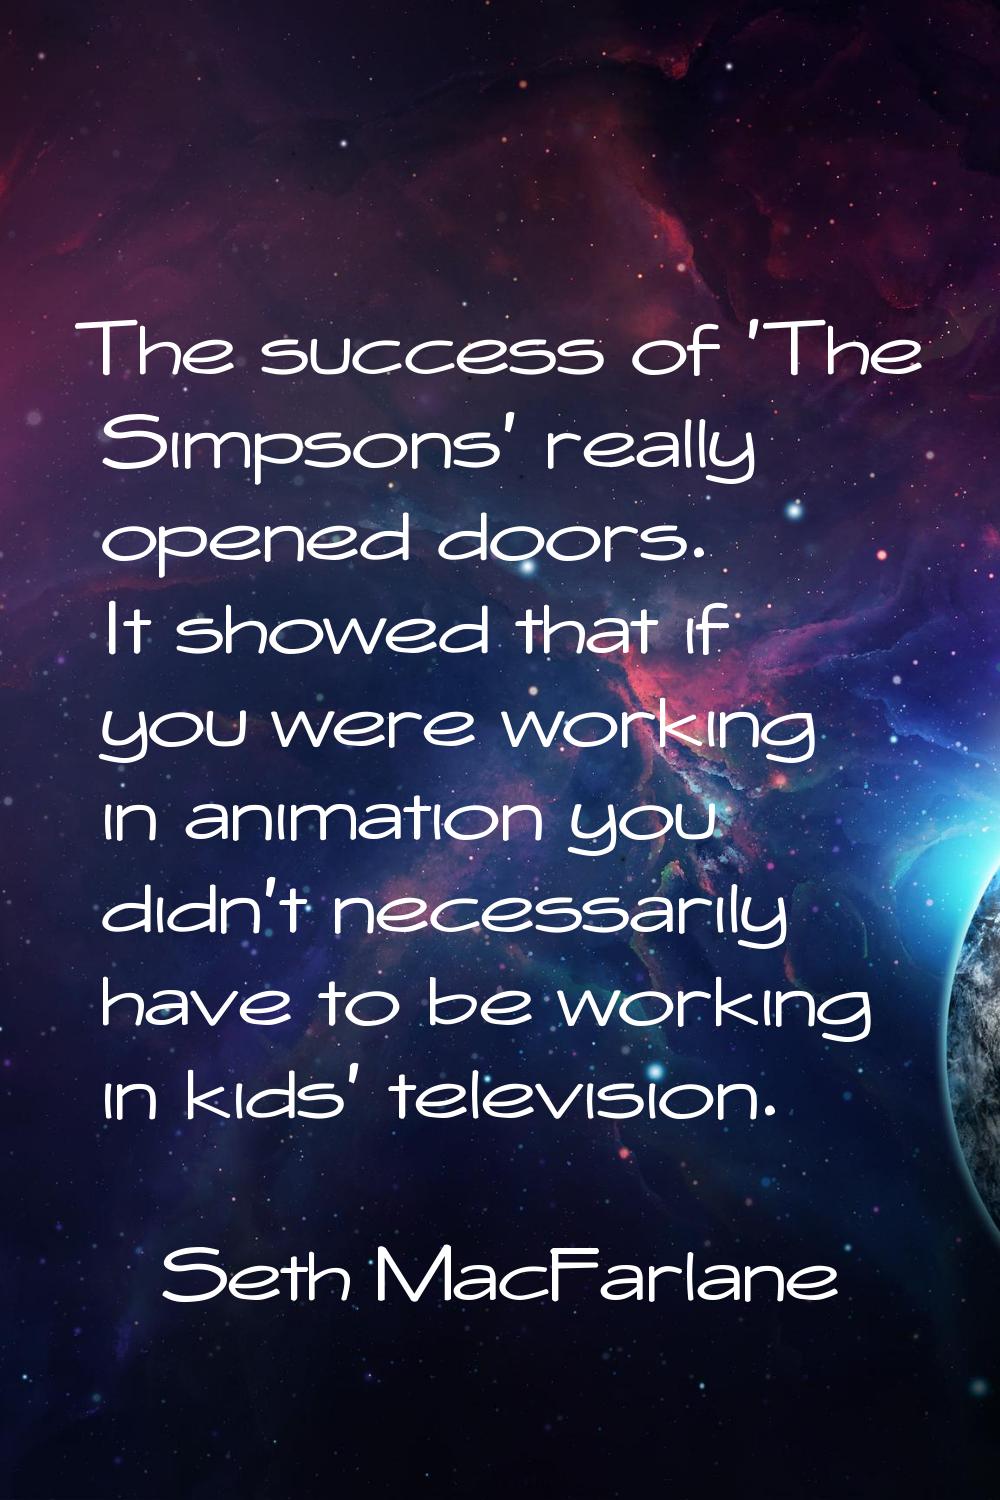 The success of 'The Simpsons' really opened doors. It showed that if you were working in animation 